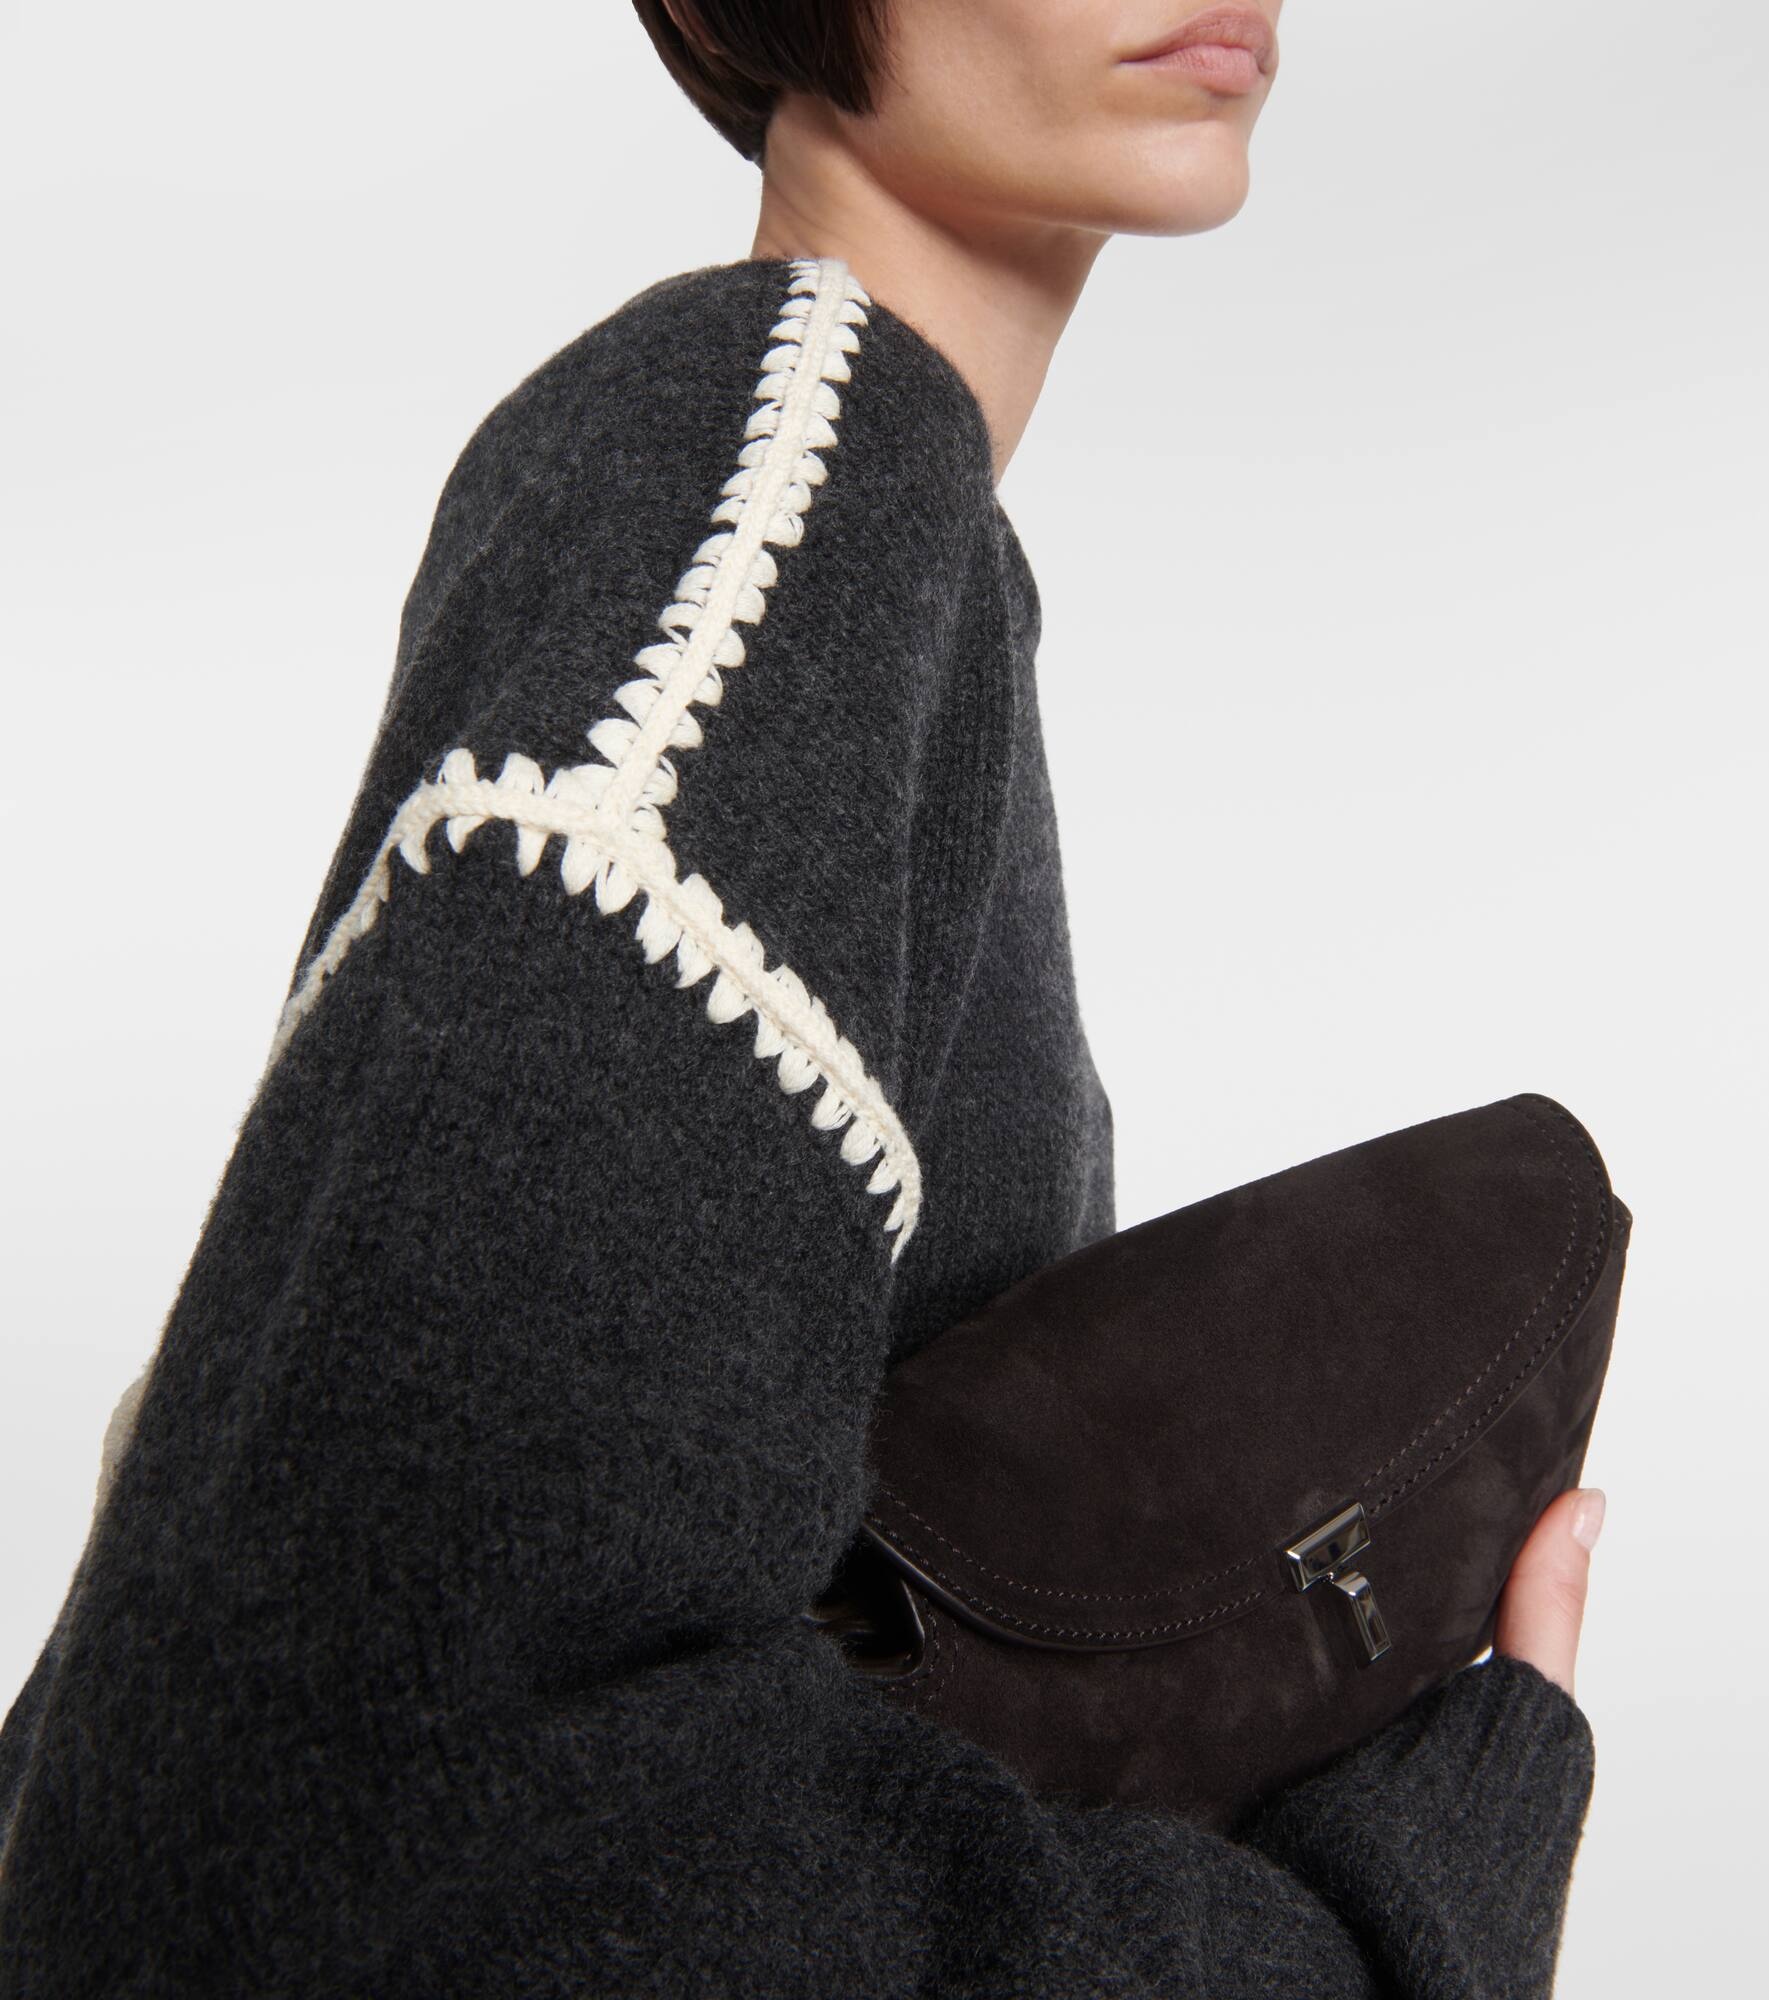 Embroidered wool and cashmere sweater - 4